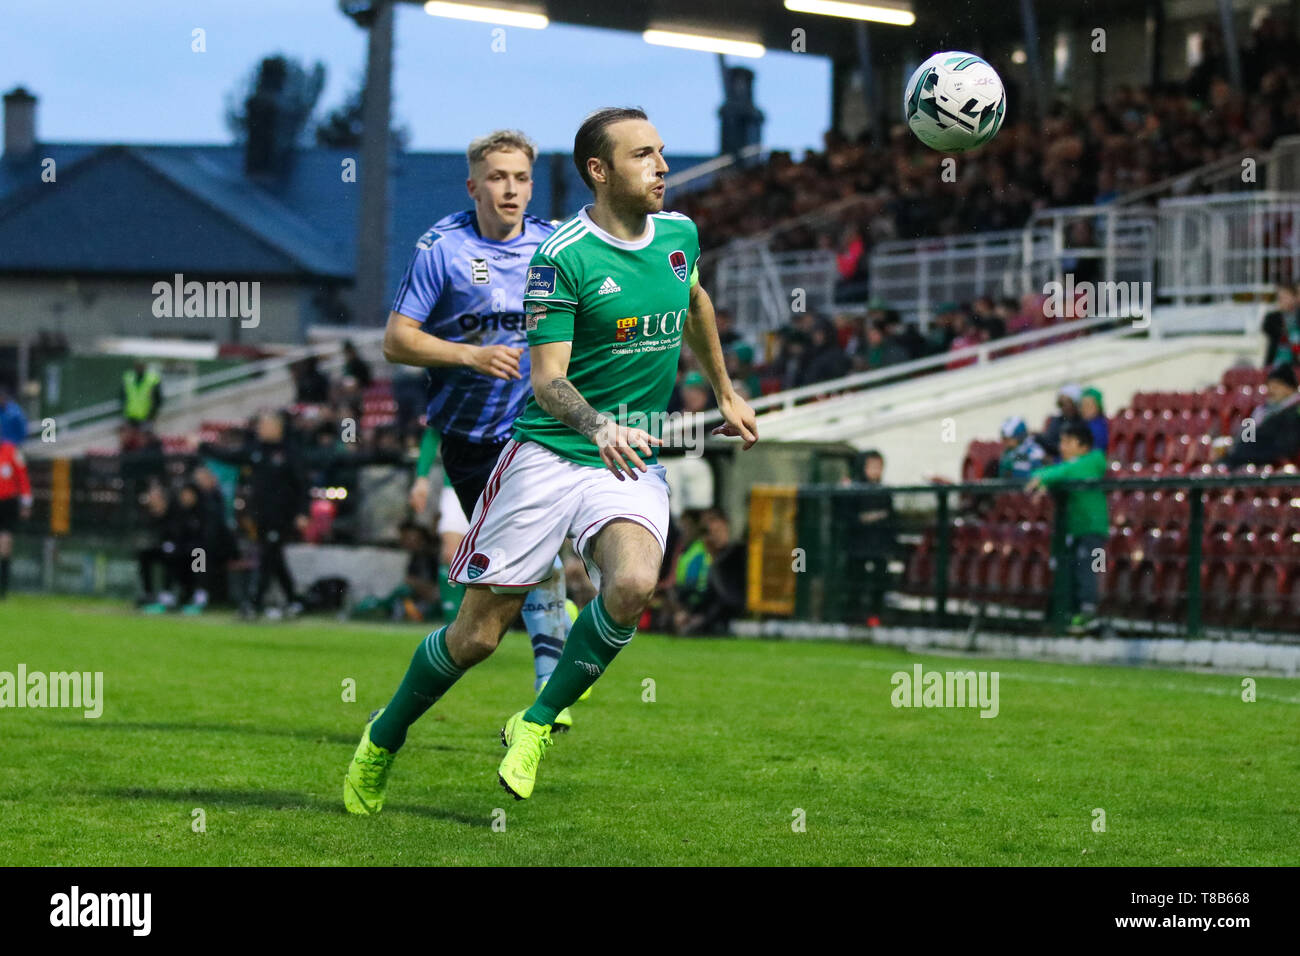 May 10th, 2019, Cork, Ireland - Cork City FC vs UCD at Turners Cross for the League of Ireland Premier Division. Stock Photo